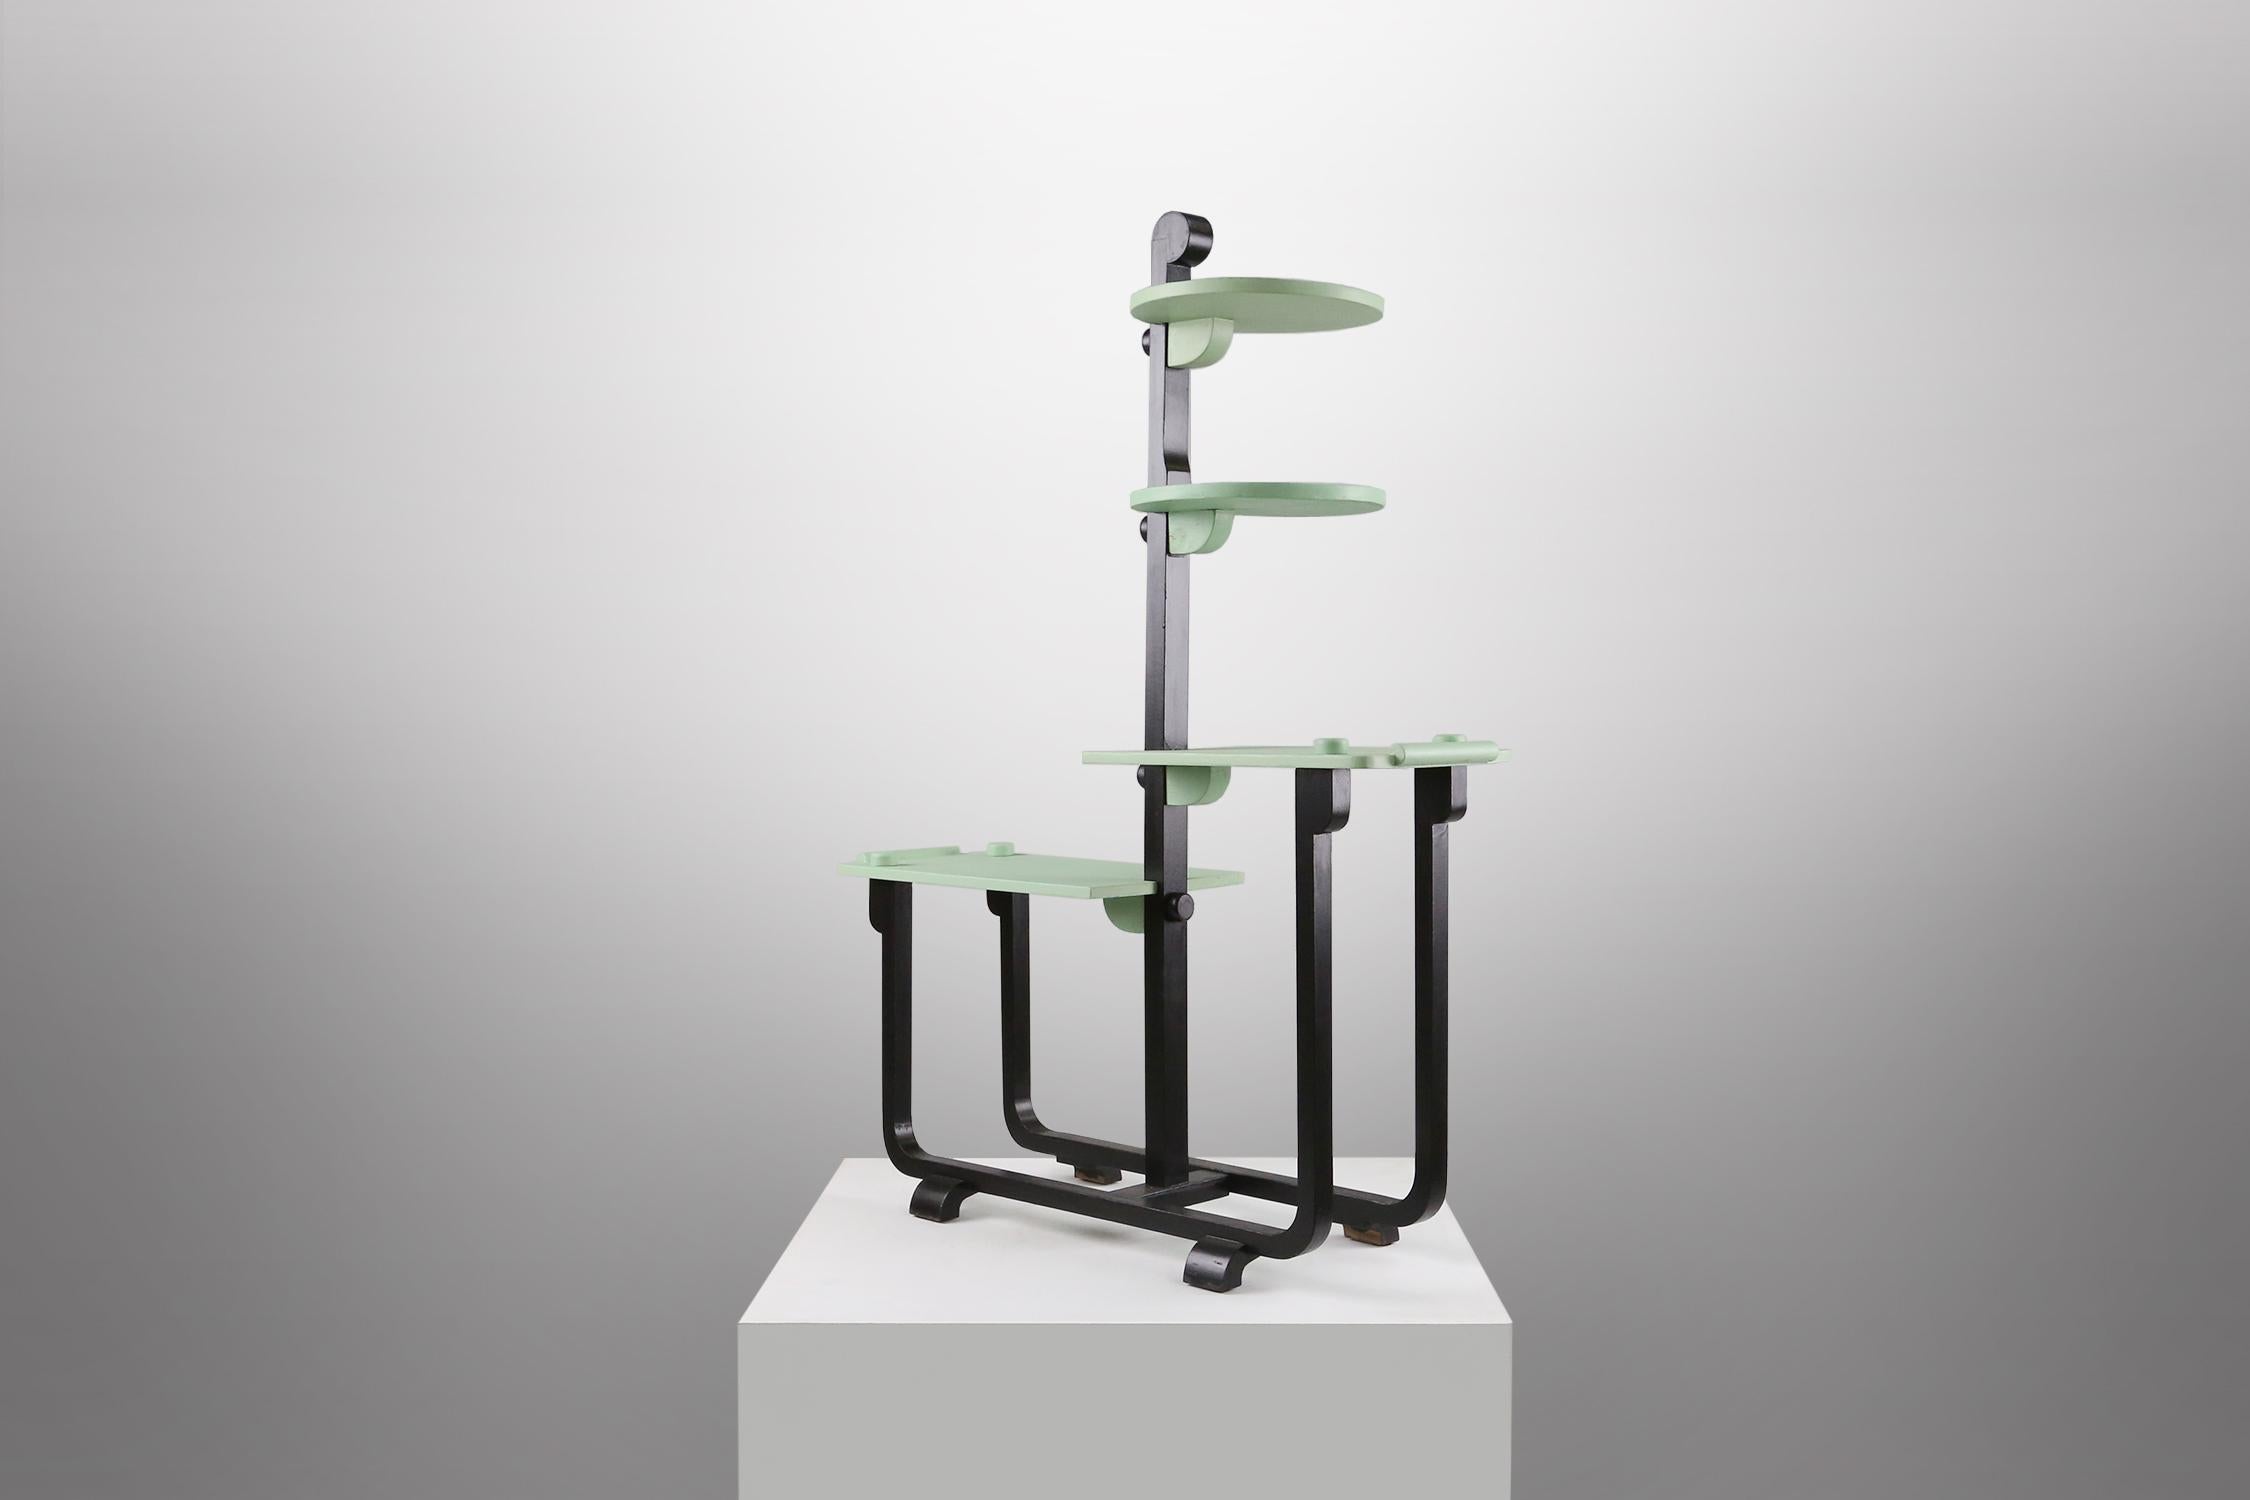 
This flower stand designed by Adré Groult around 1925 is made of black lacquered wood with green shelves. It is a elegant and modern piece of modernism and Art Deco.

André Groult (1884-1966) was a French decorator and furniture designer, and one